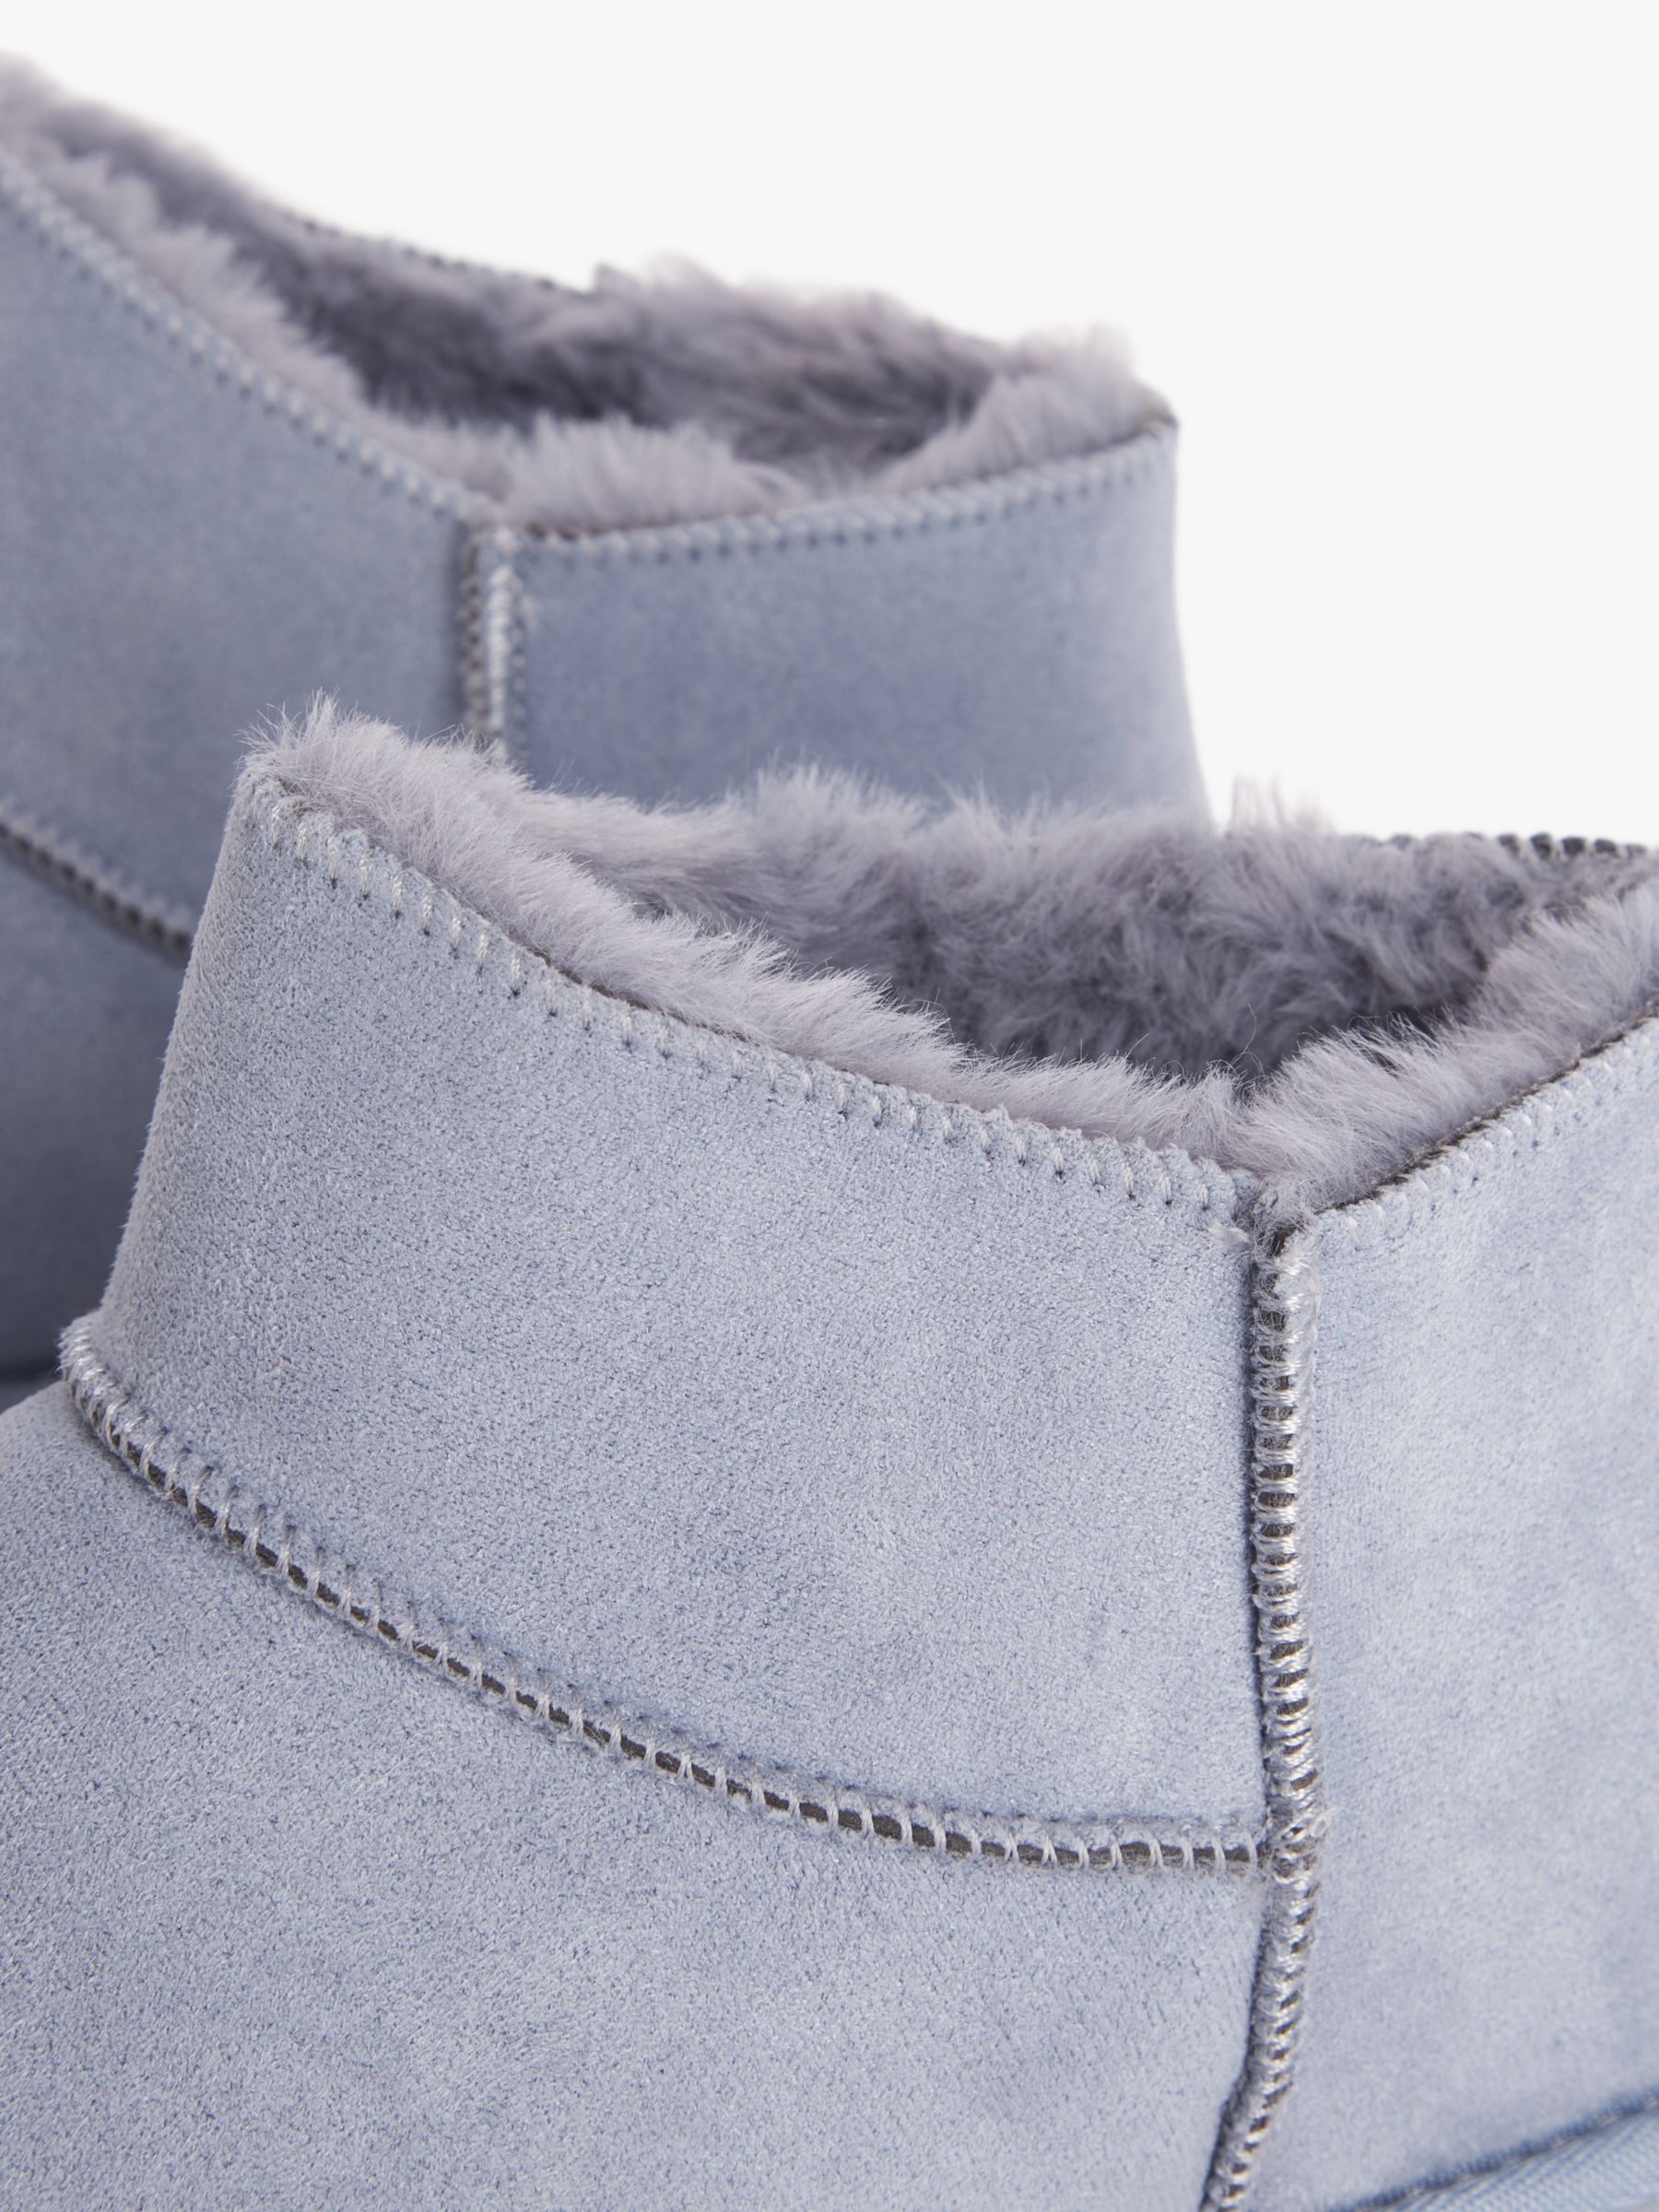 John Lewis ANYDAY Microsuede Faux Fur Cropped Slipper Boots, Grey, M